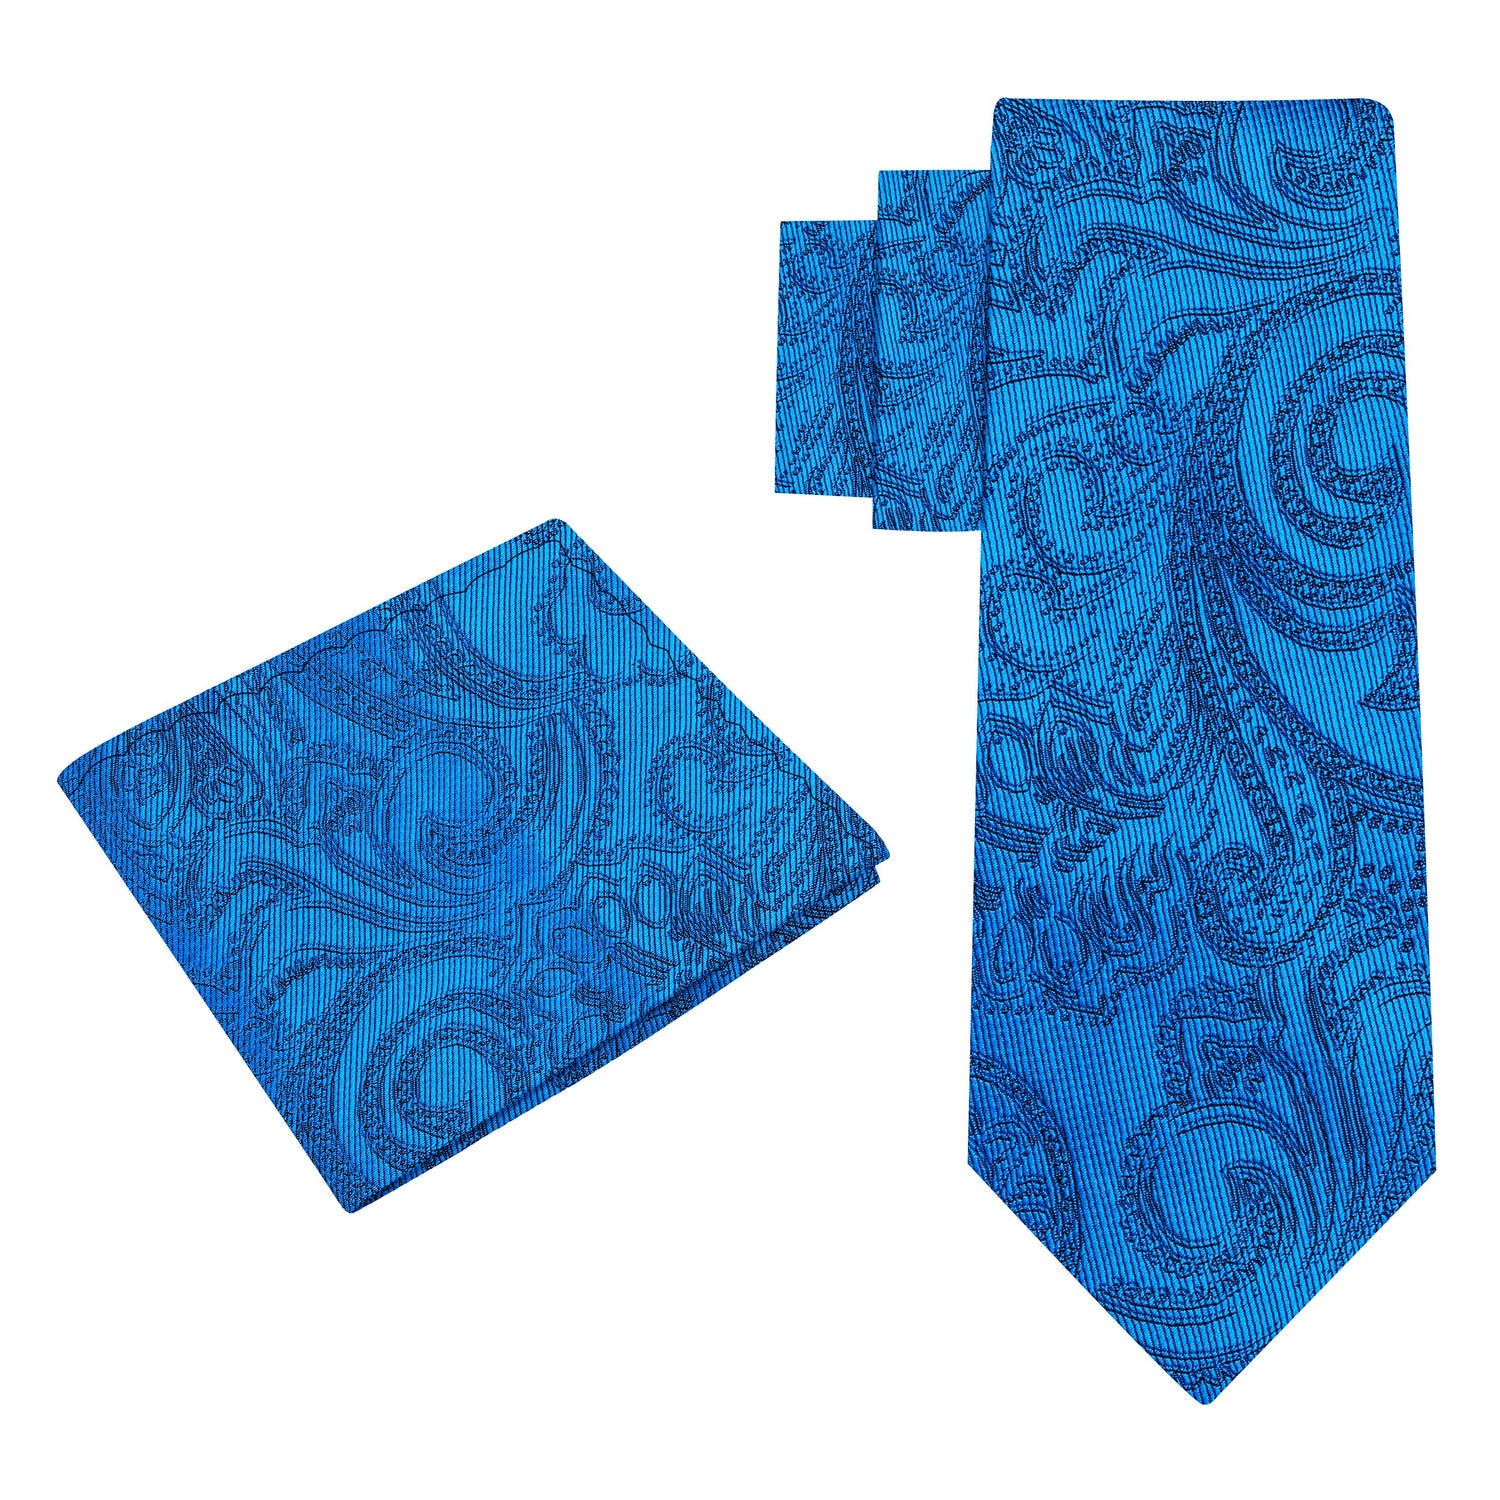 Alt view: Teal Paisley Tie and Square